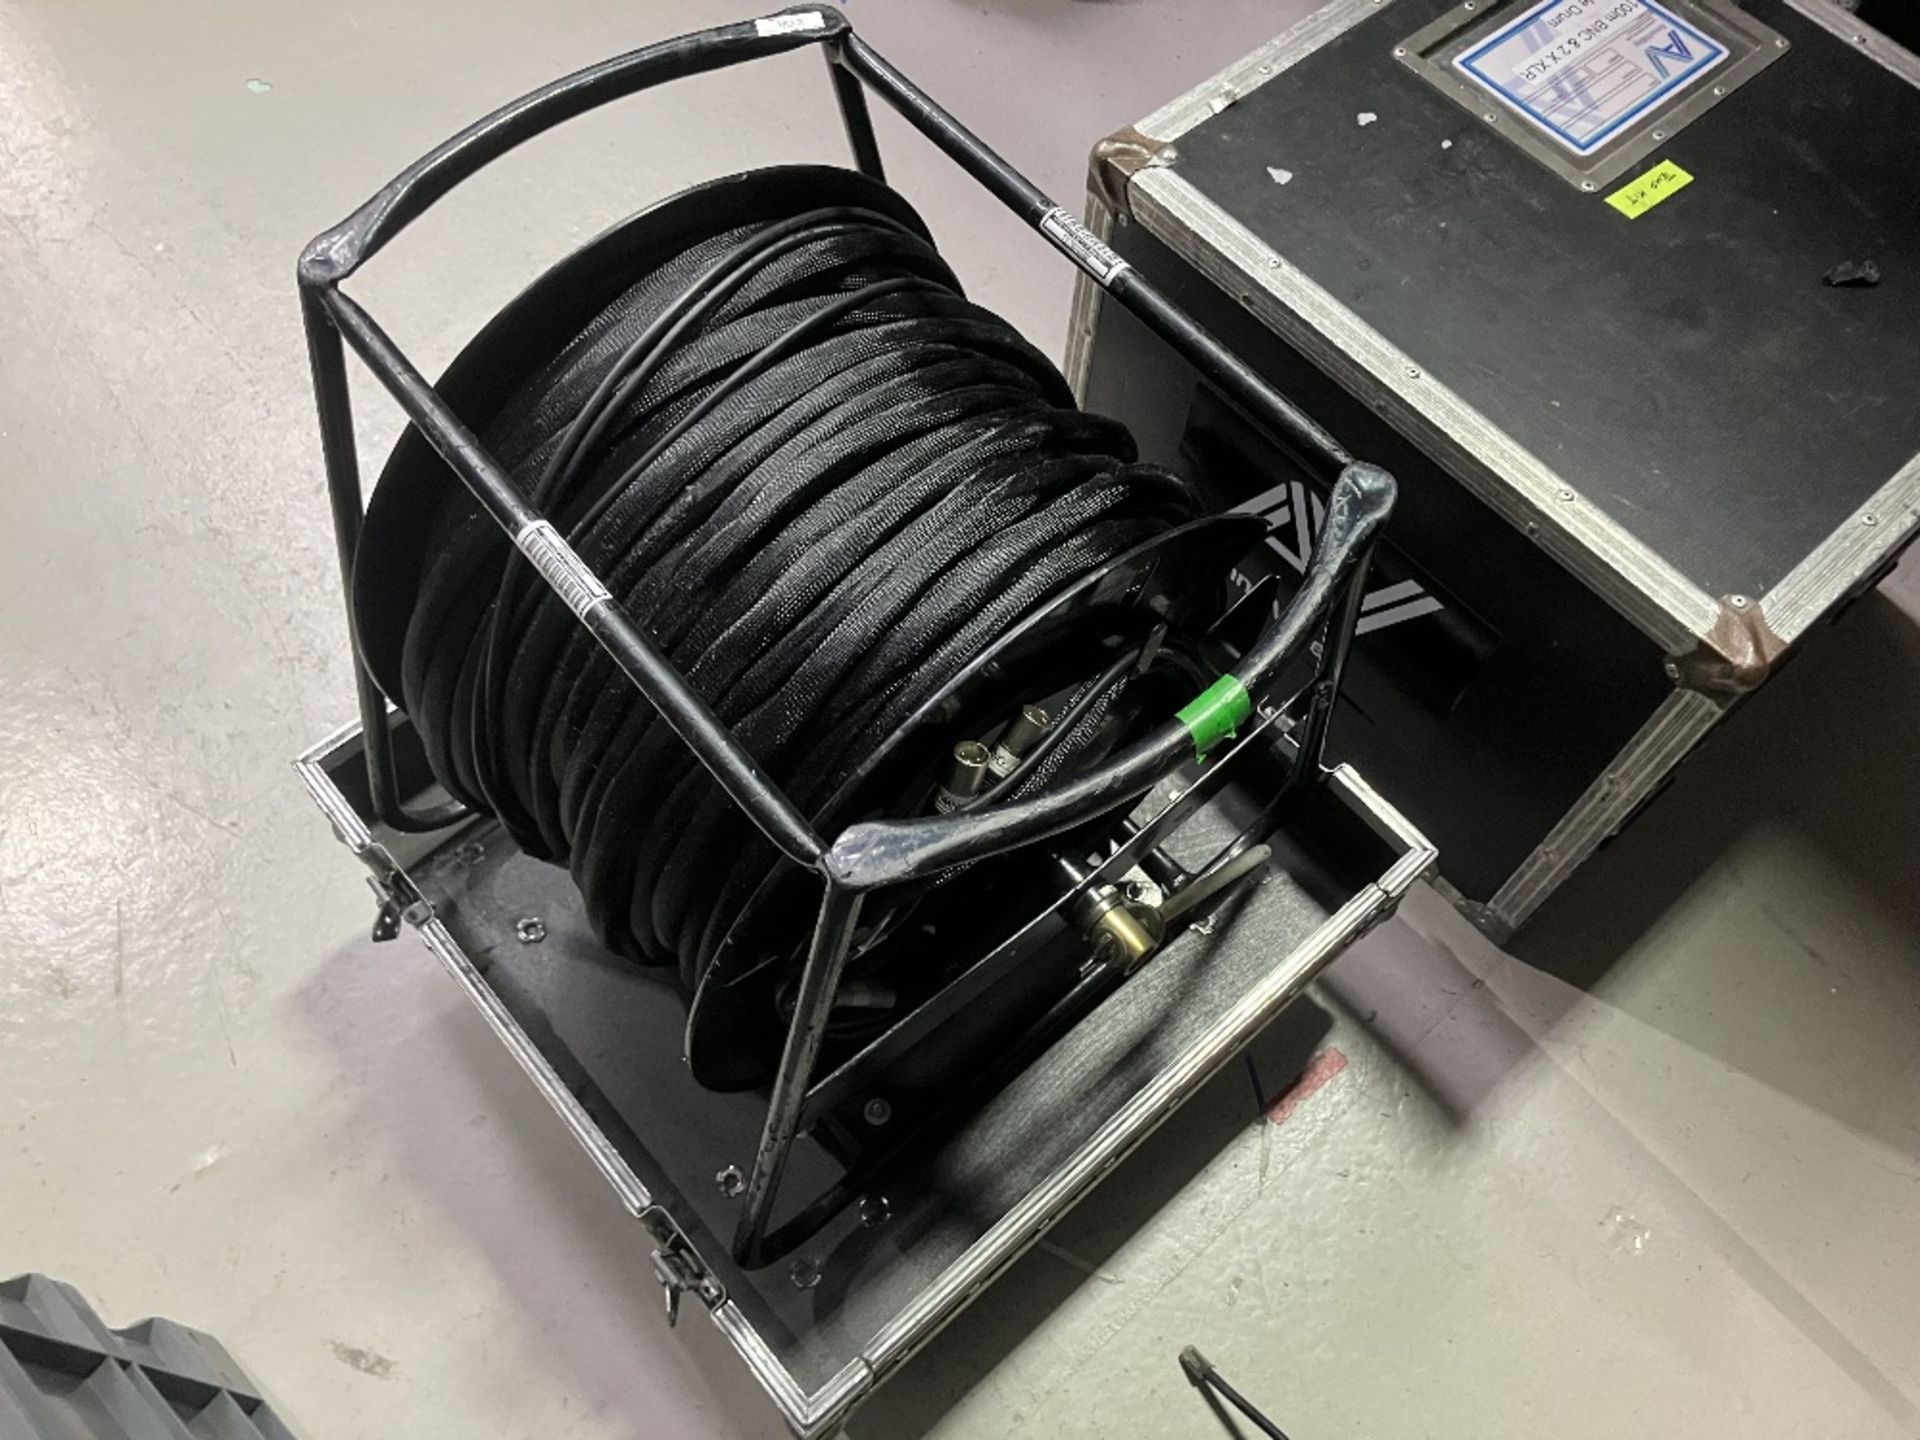 100m Bnc & (2) XLR Cables With Heavy Duty Mobile Flight Case - Image 6 of 11